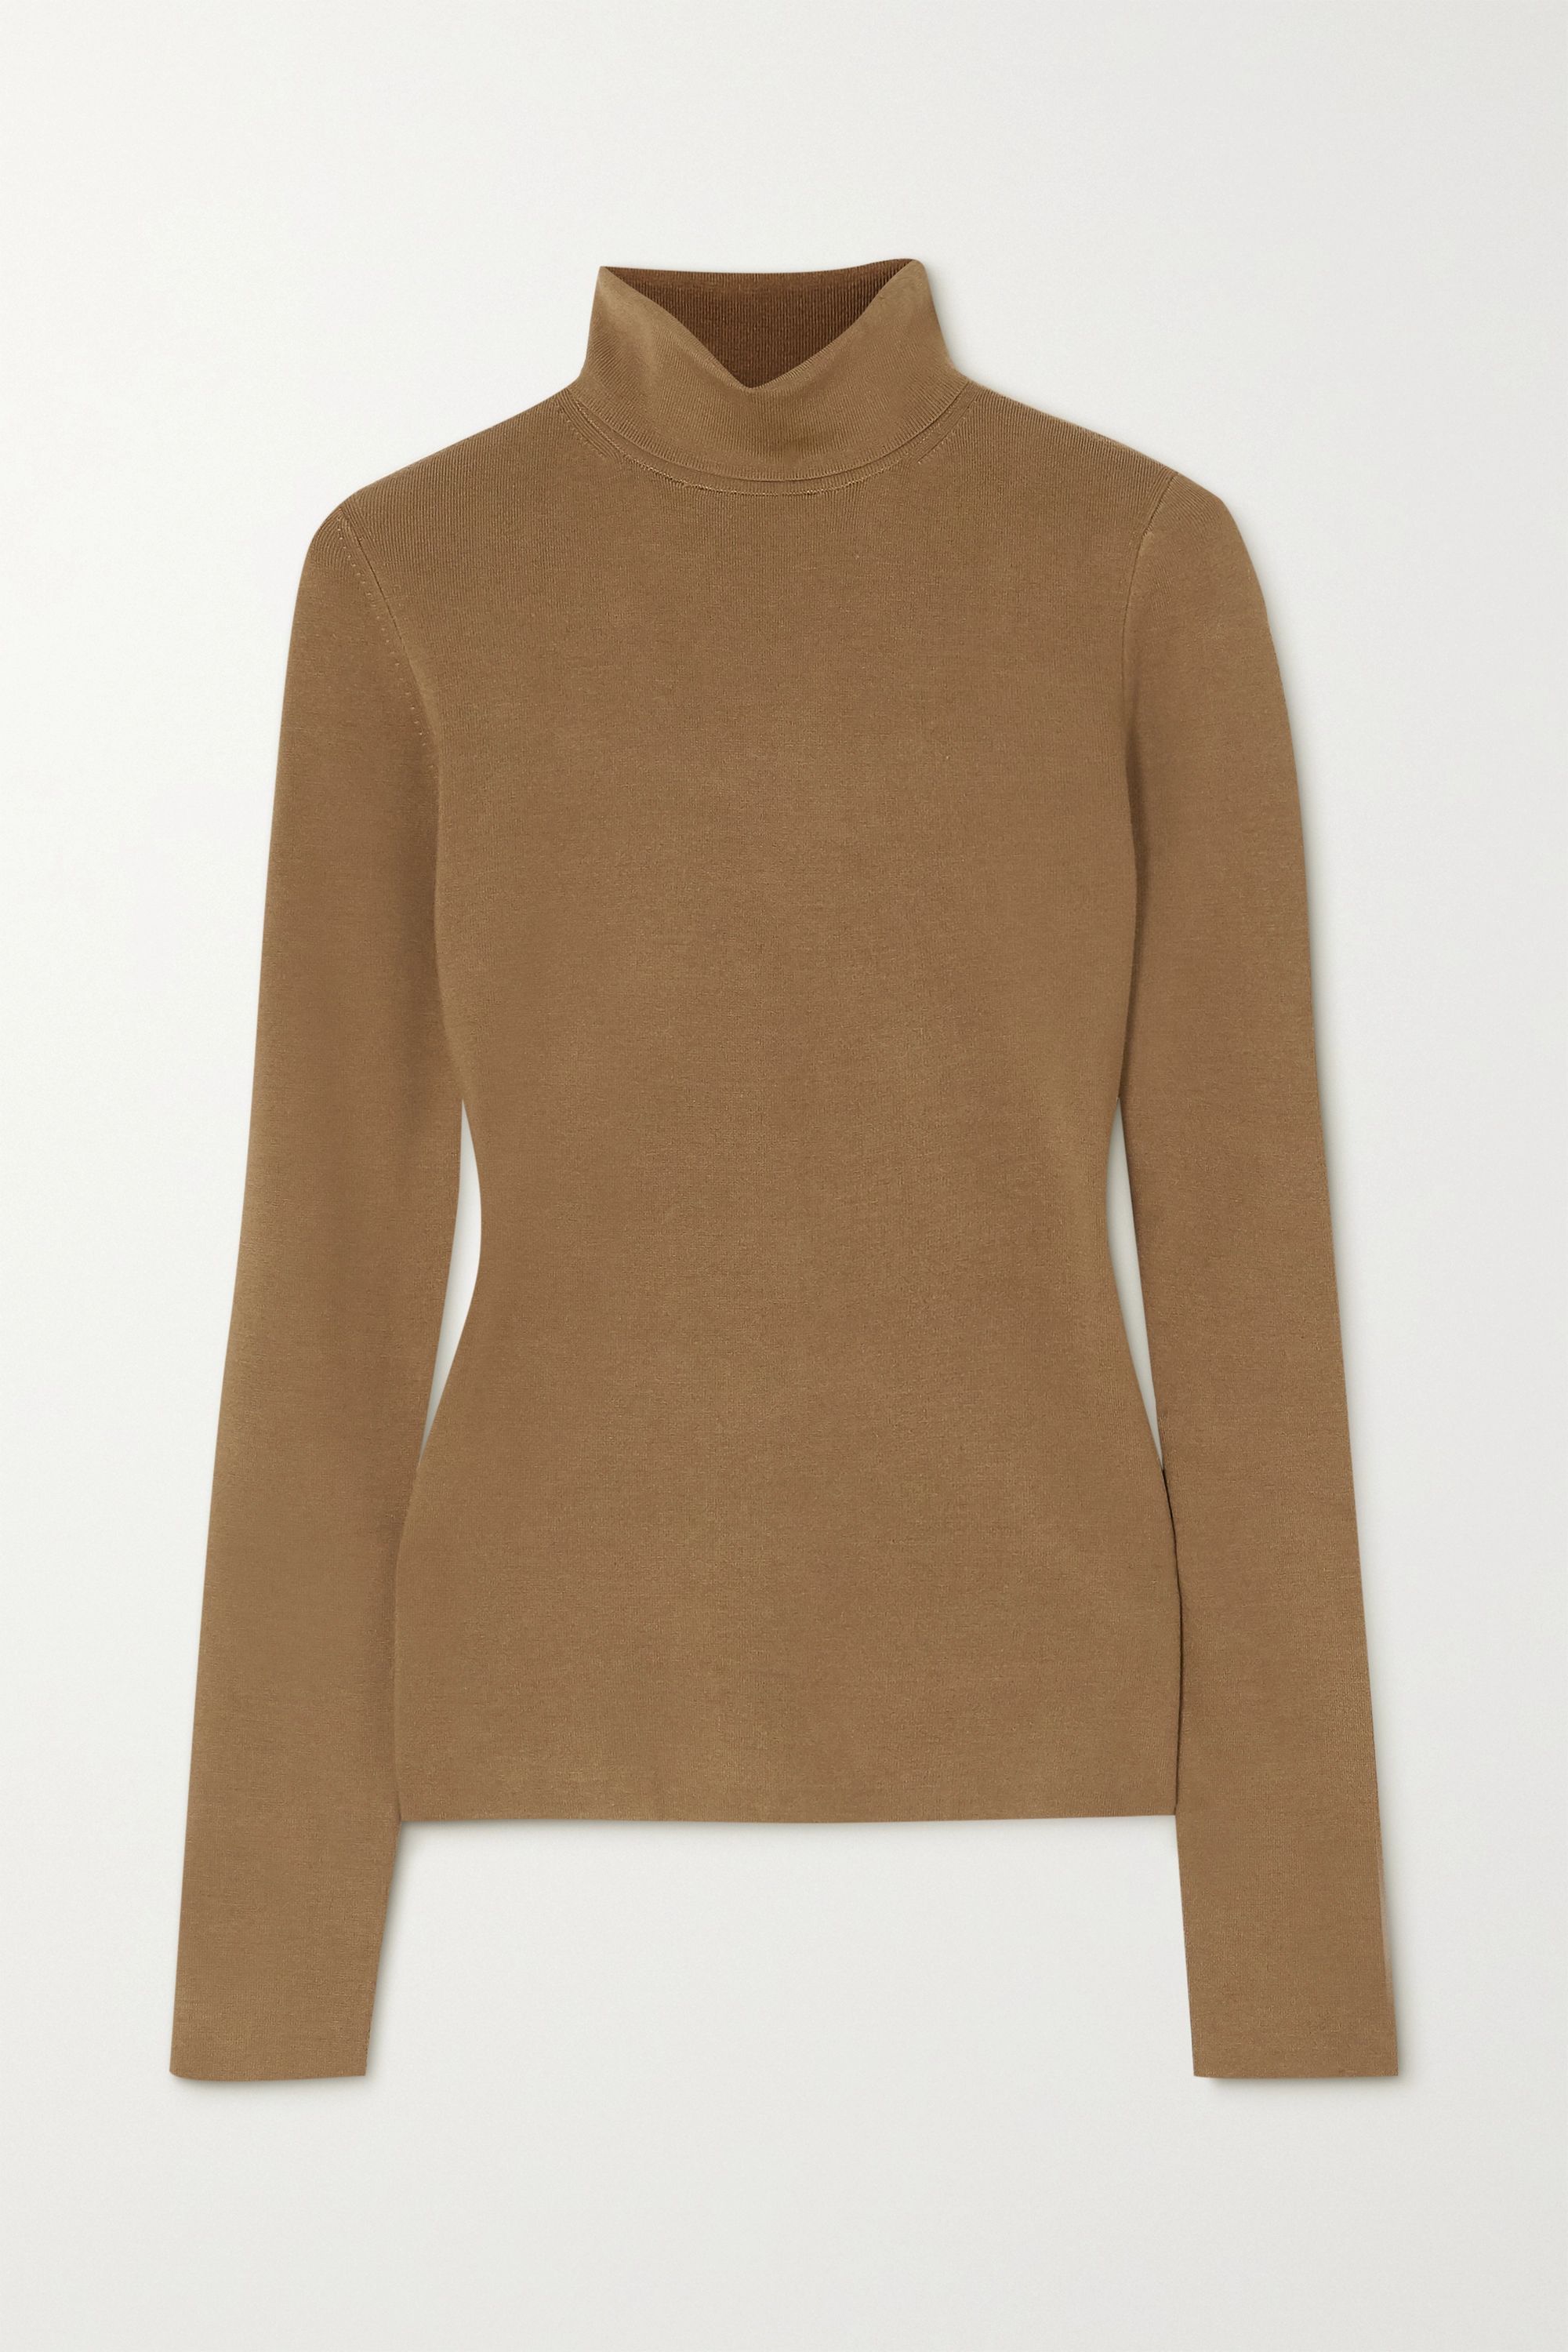 The Net-a-Porter Winter Sale is Here and I’ve Picked Out All the Best Bits